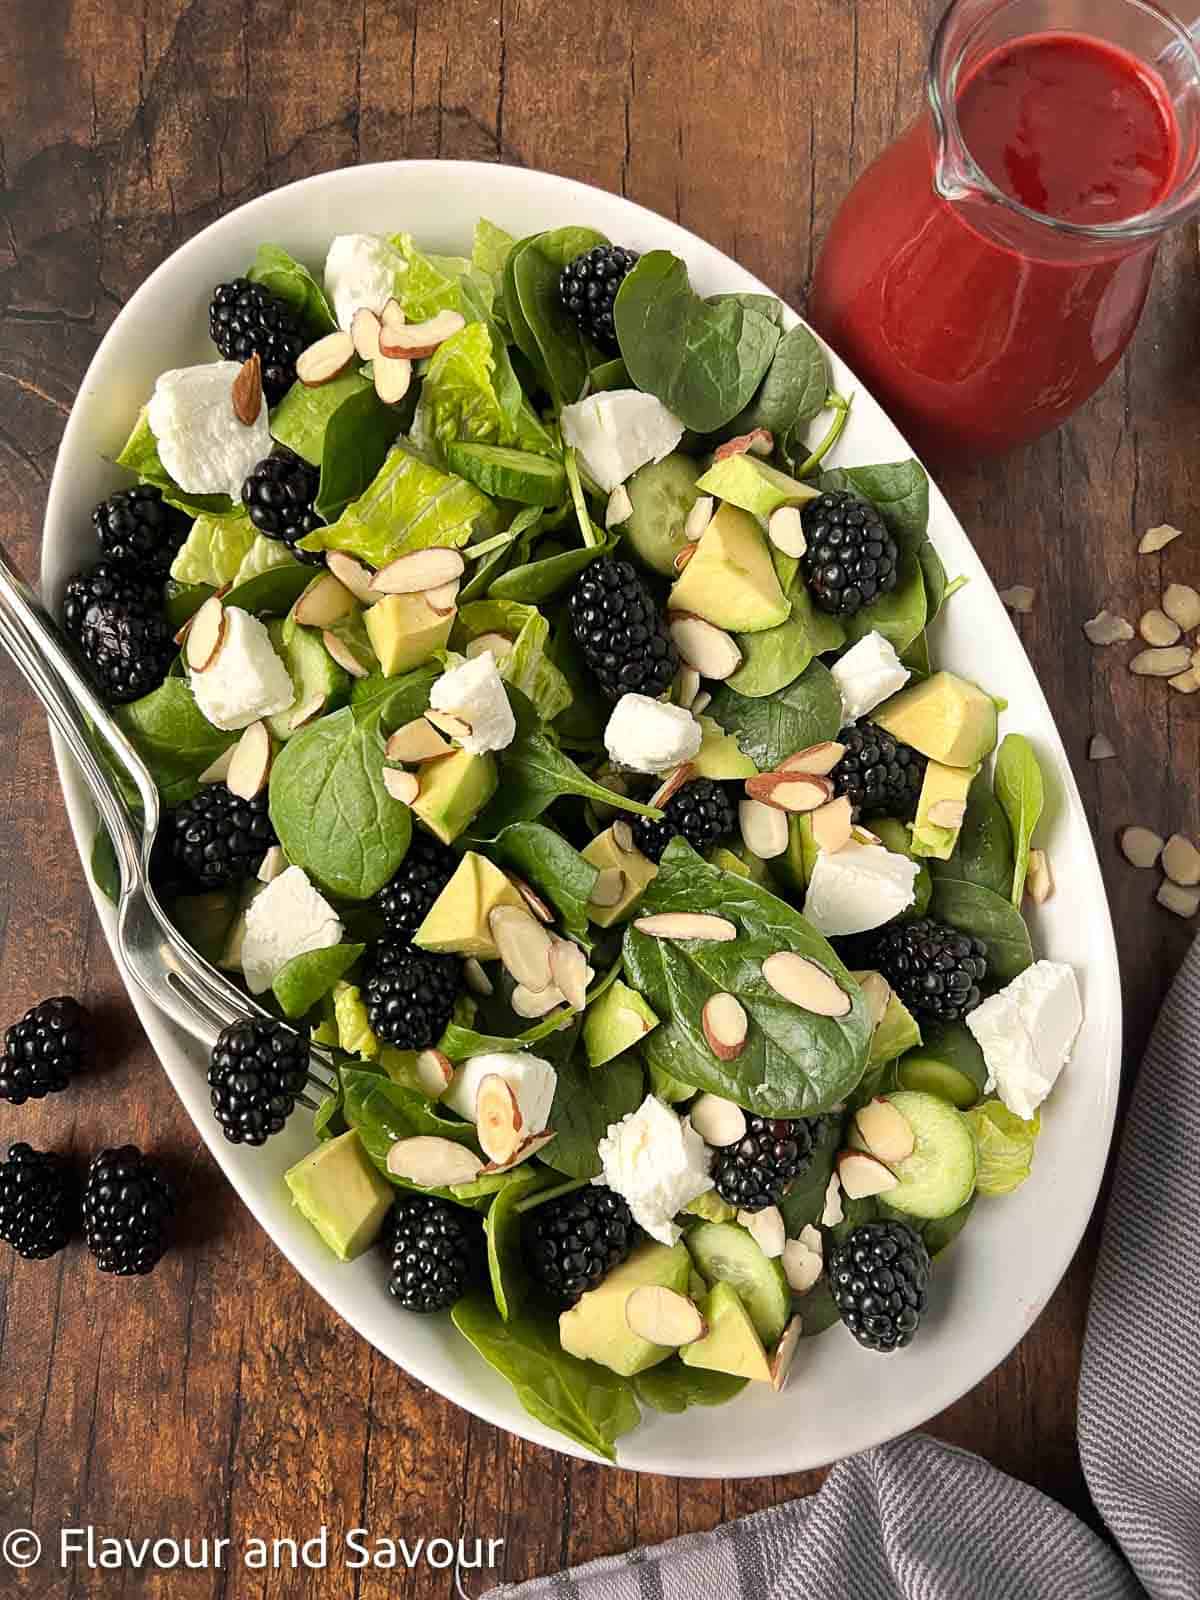 Spinach salad with blackberries, goat cheese, avocado and toasted walnuts in a bowl with a small pitcher of blackberry dressing beside.